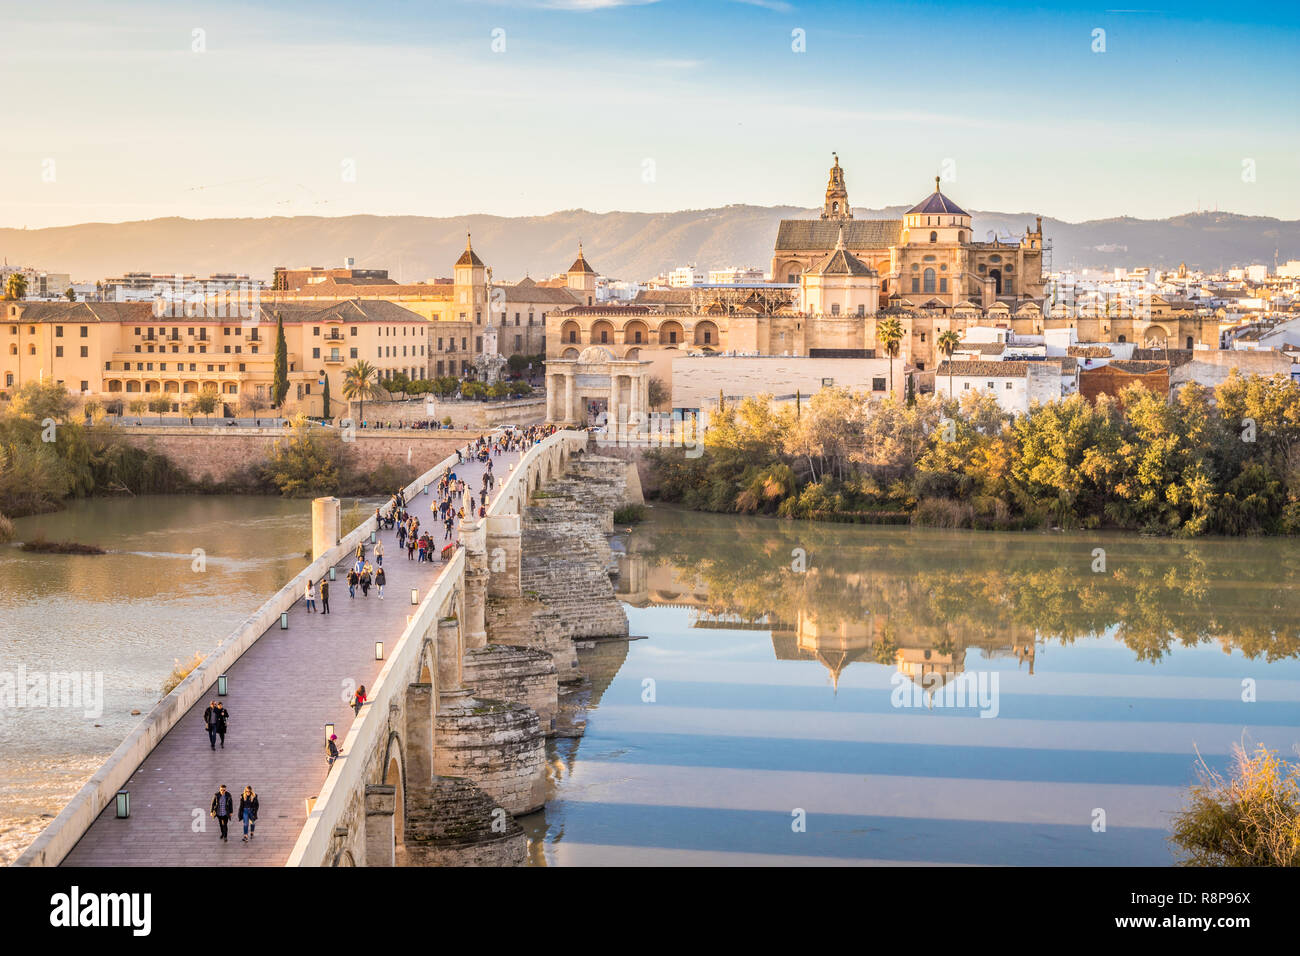 Nice Panoramic view of Cordoba in Southern Spain Stock Photo